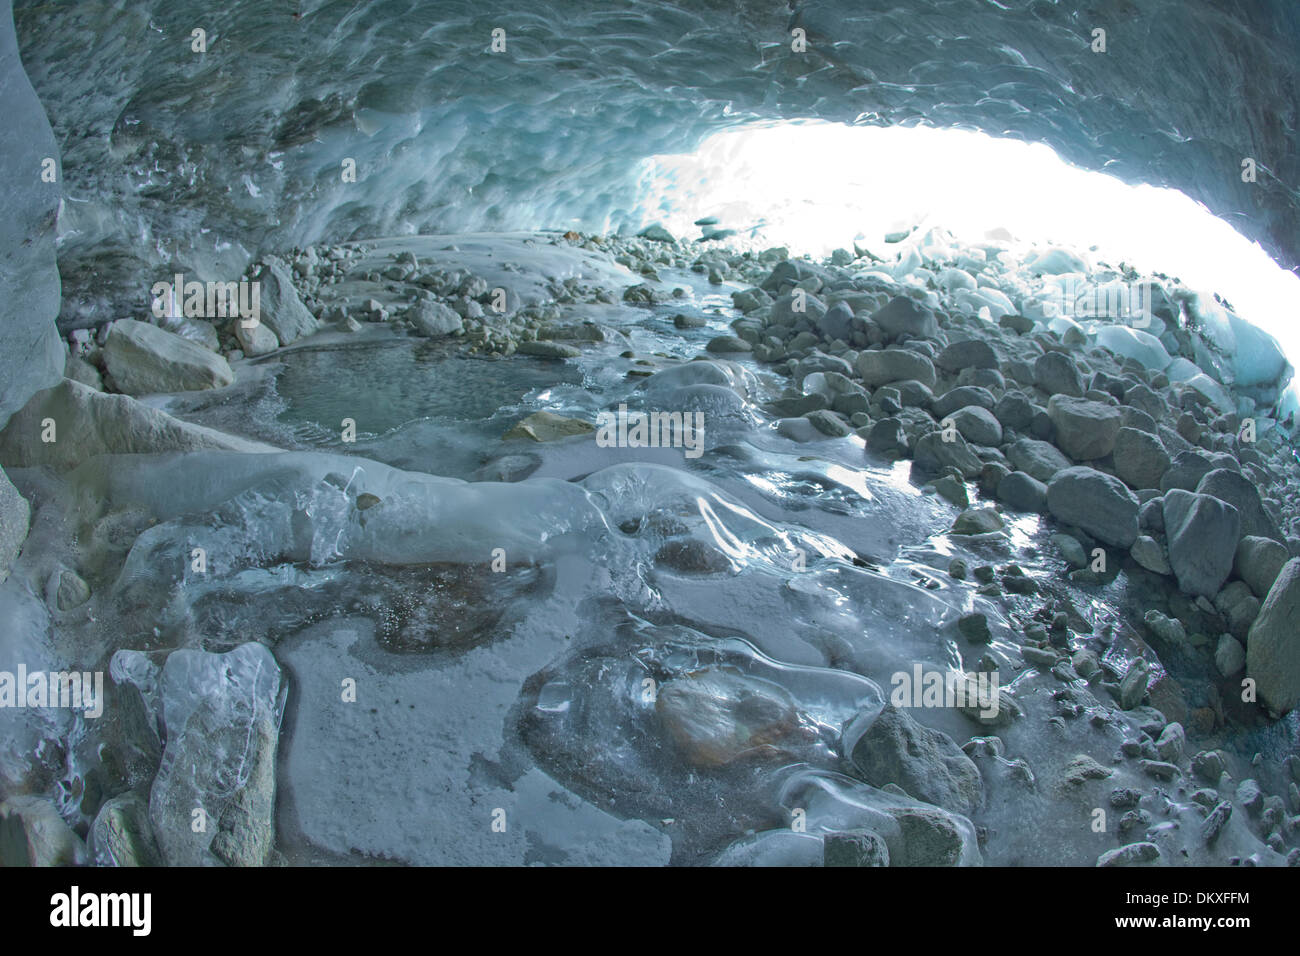 Switzerland, Europe, winter, canton, Valais, Zinal, Val d'Anniviers, ice, glacier, ice, moraine, mouth of glacier, Stock Photo